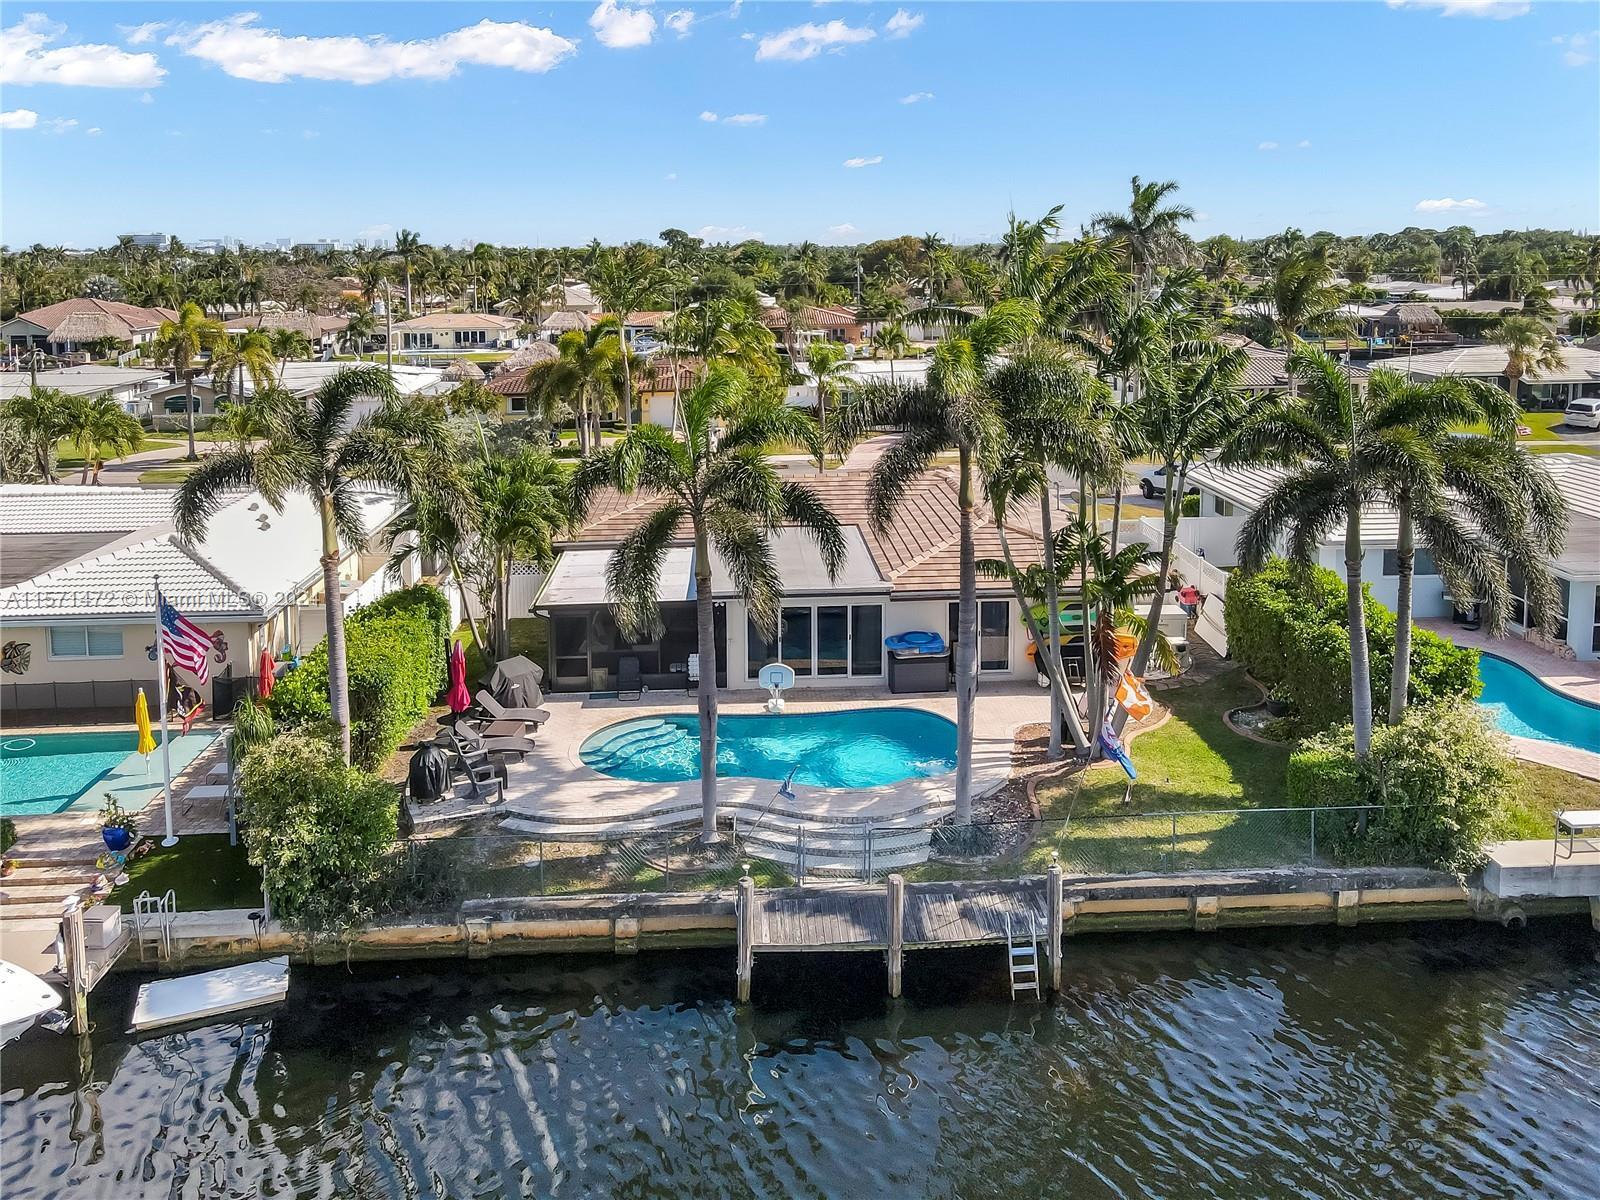 Beautiful waterfront home in a great neighborhood on a rare wide canal with amazing views. Relax in 